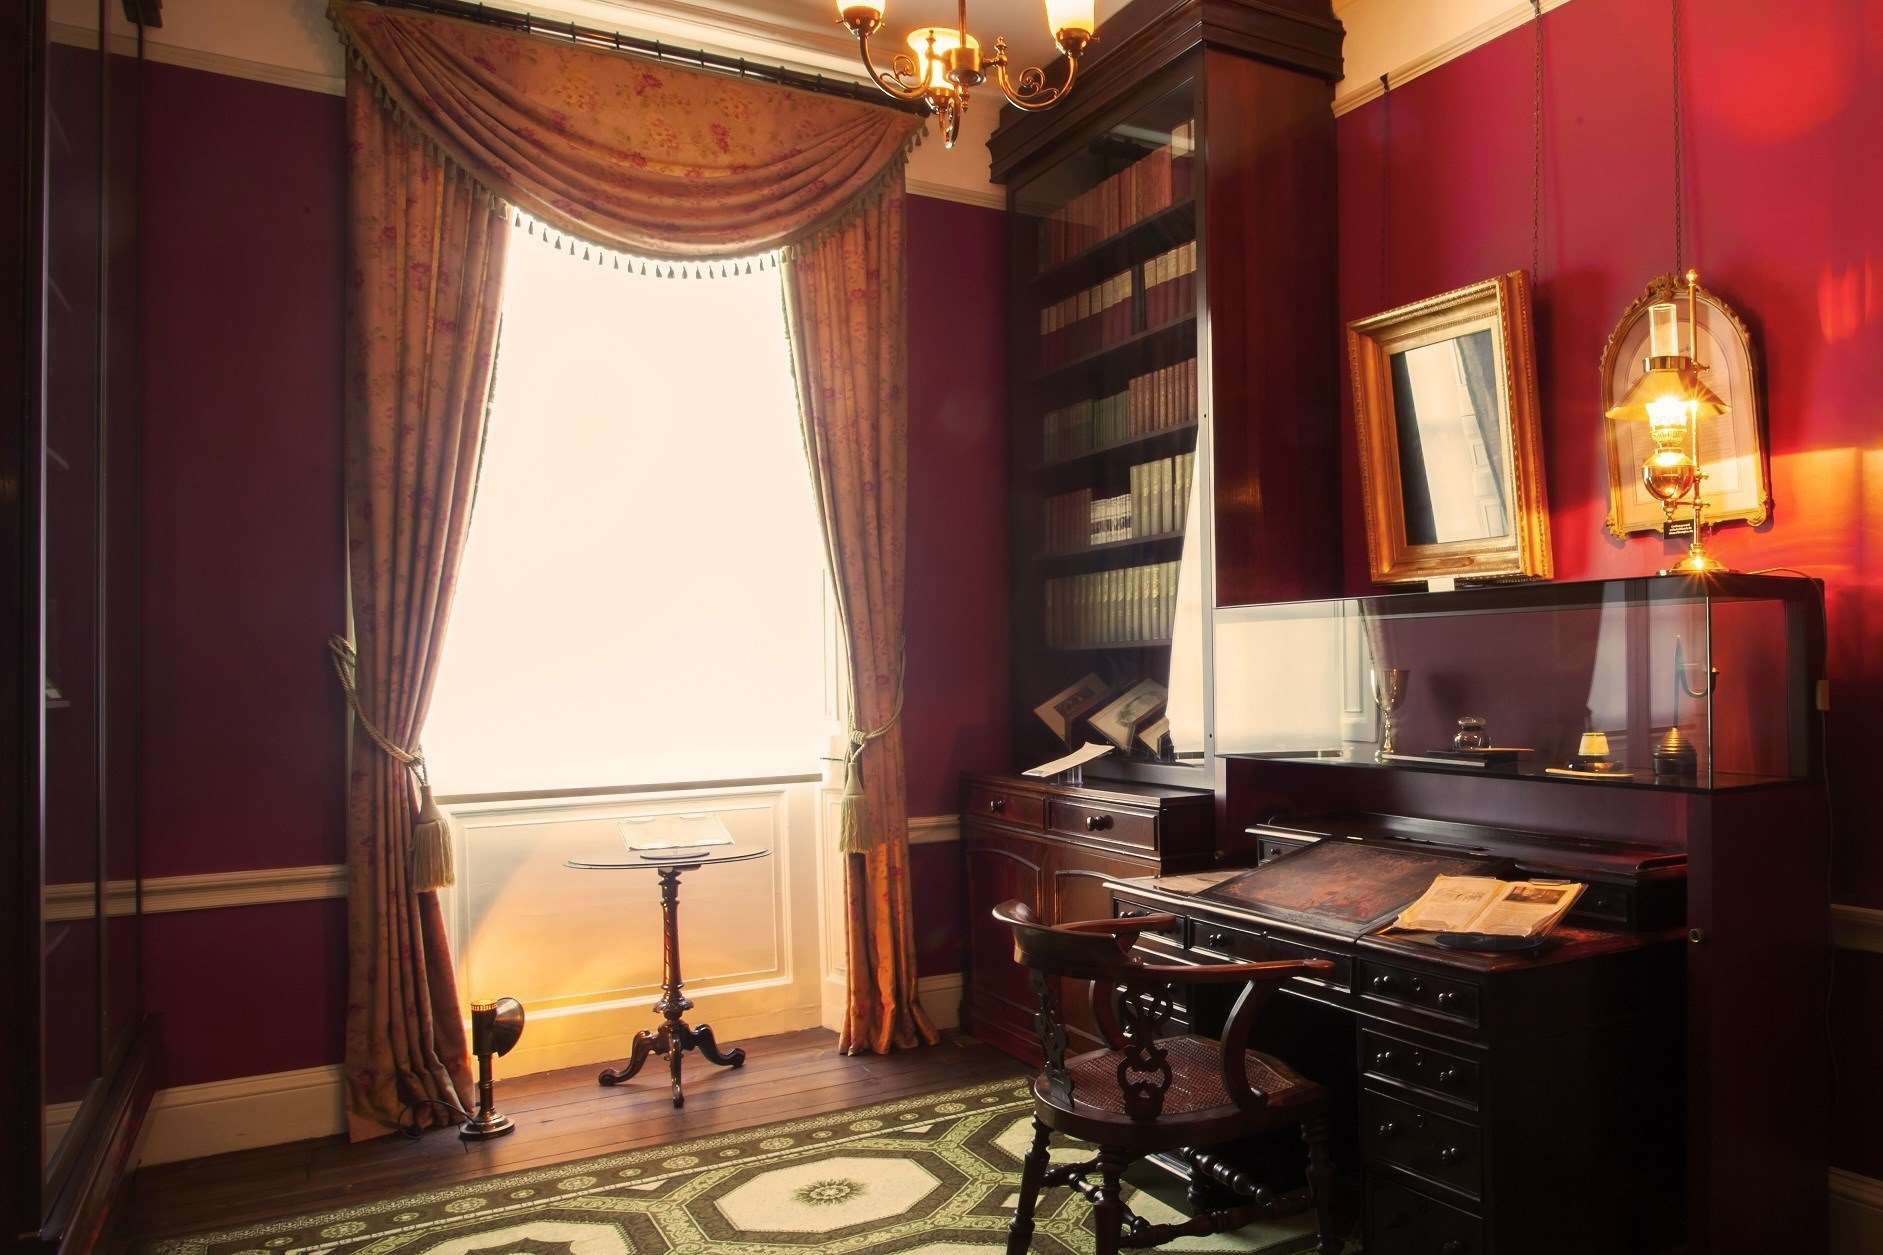 Dickens' study at the Charles Dickens Museum in London